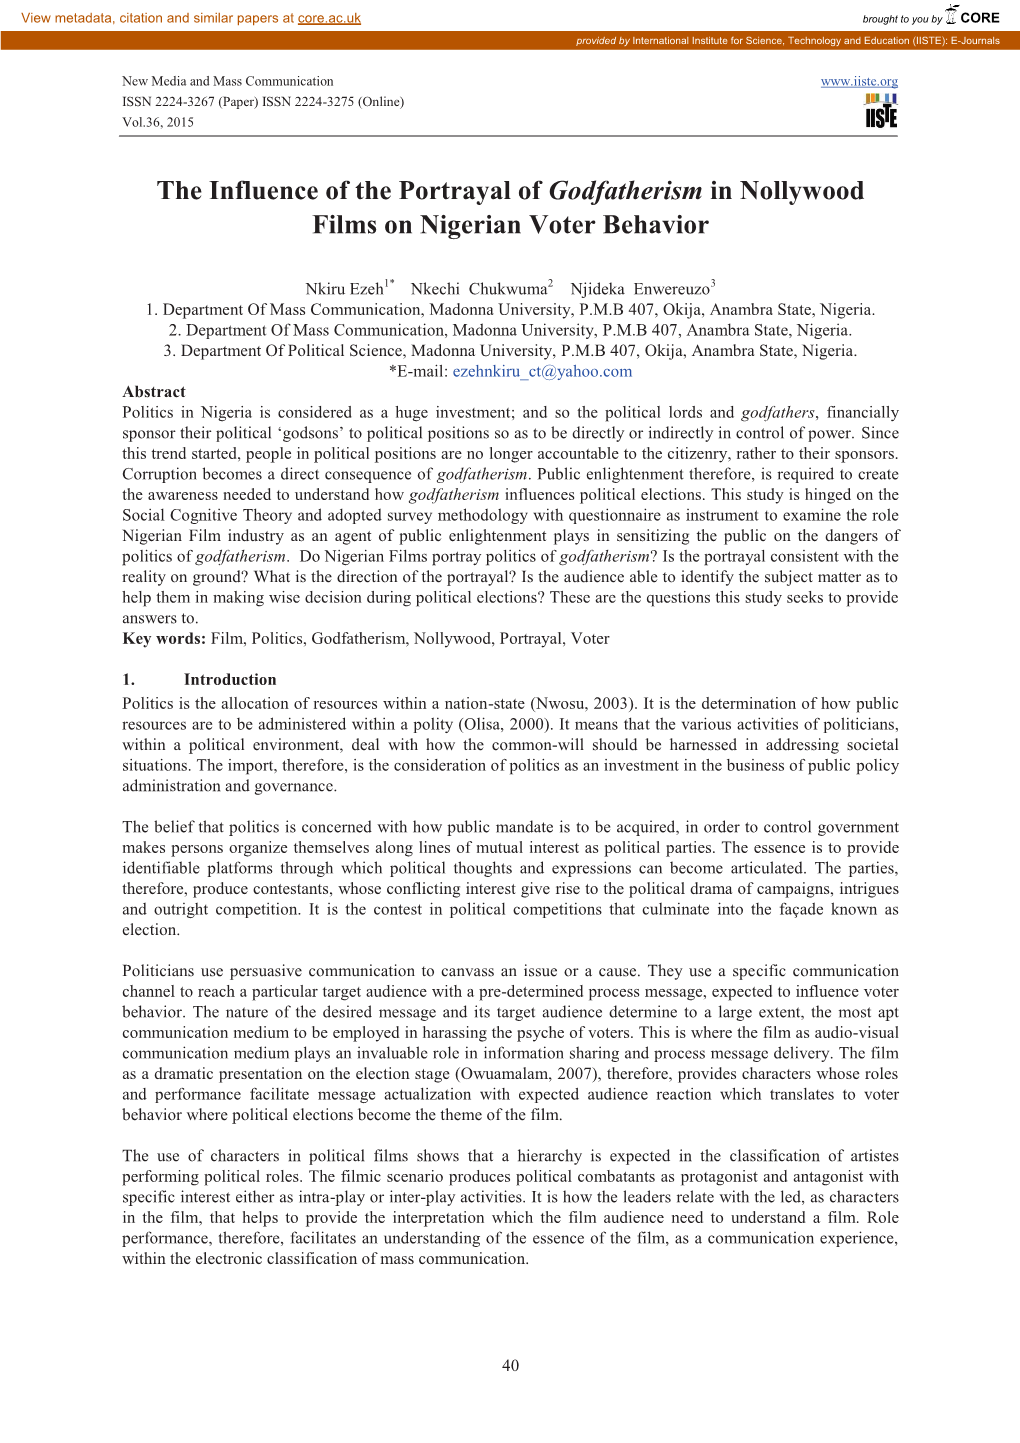 The Influence of the Portrayal of Godfatherism in Nollywood Films on Nigerian Voter Behavior